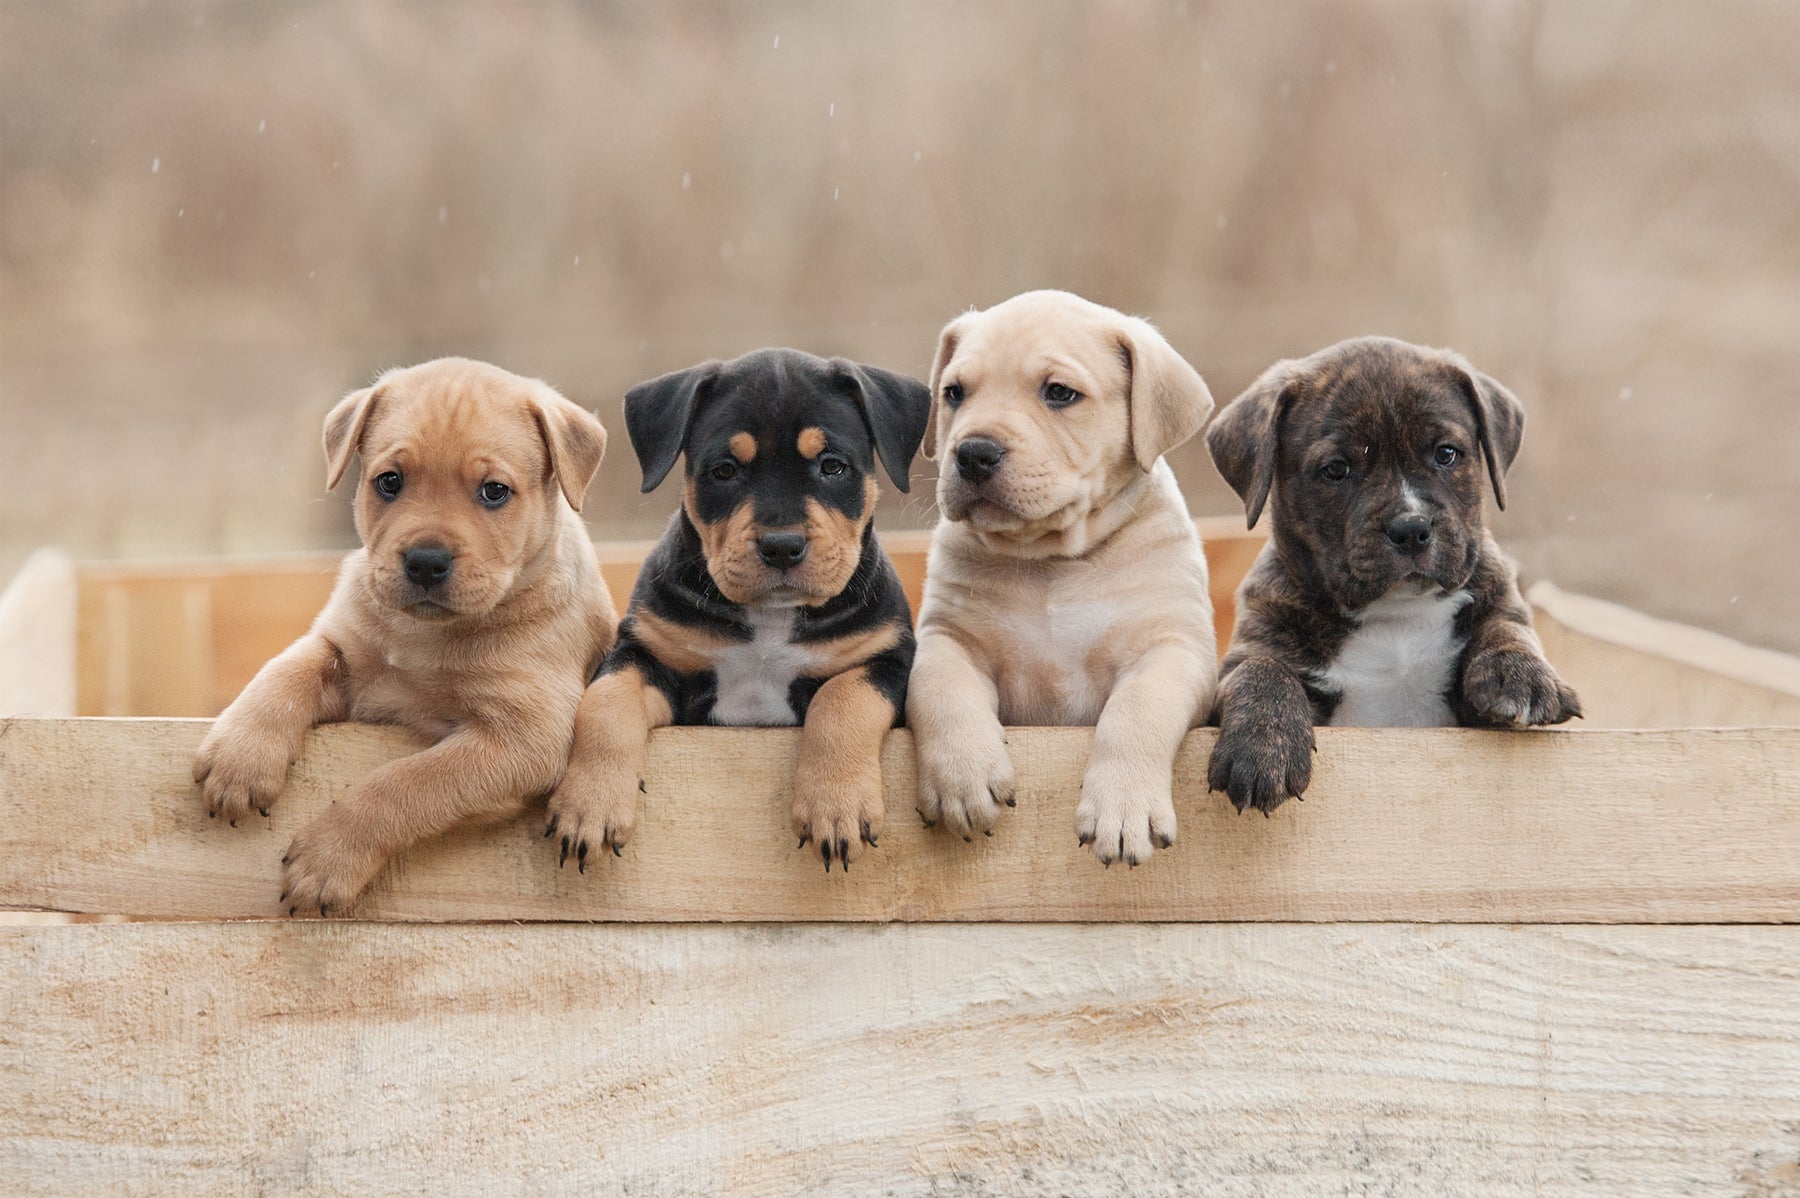 Bringing Home a New Puppy: Tips and Tricks for First-Time Puppy Owners